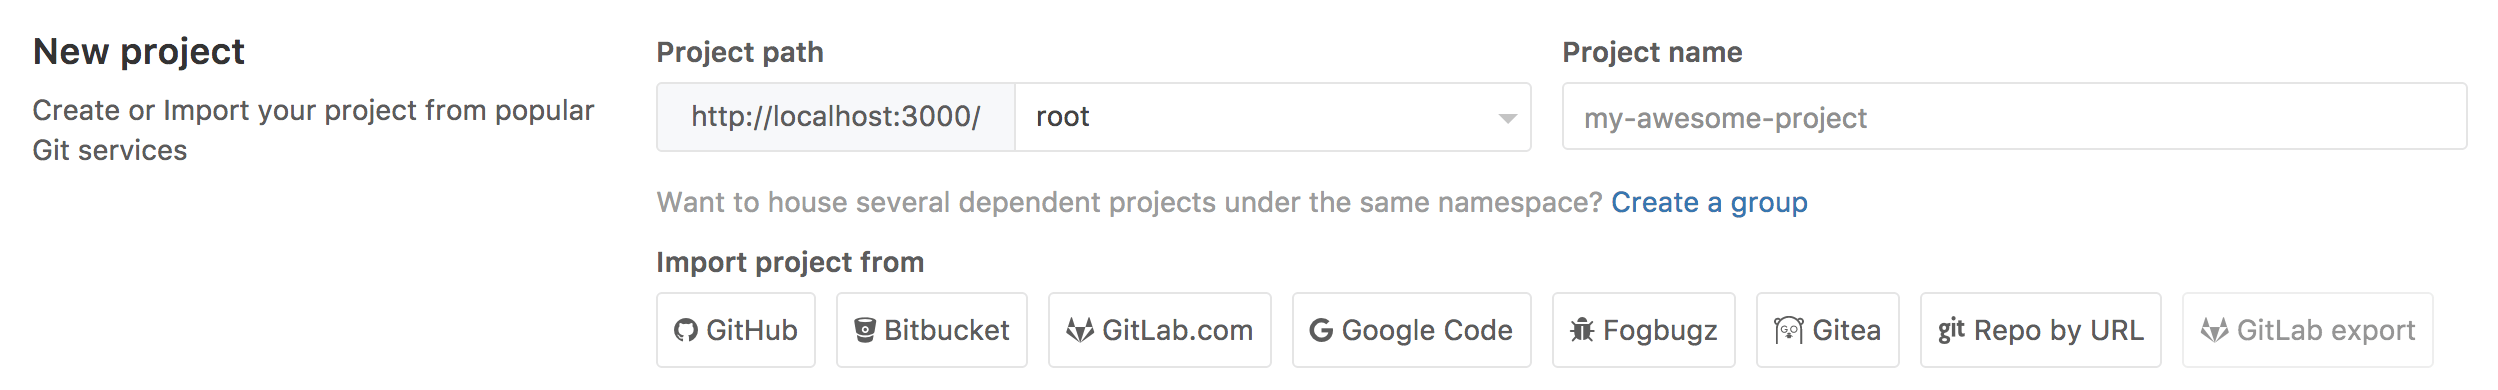 New project page on GitLab